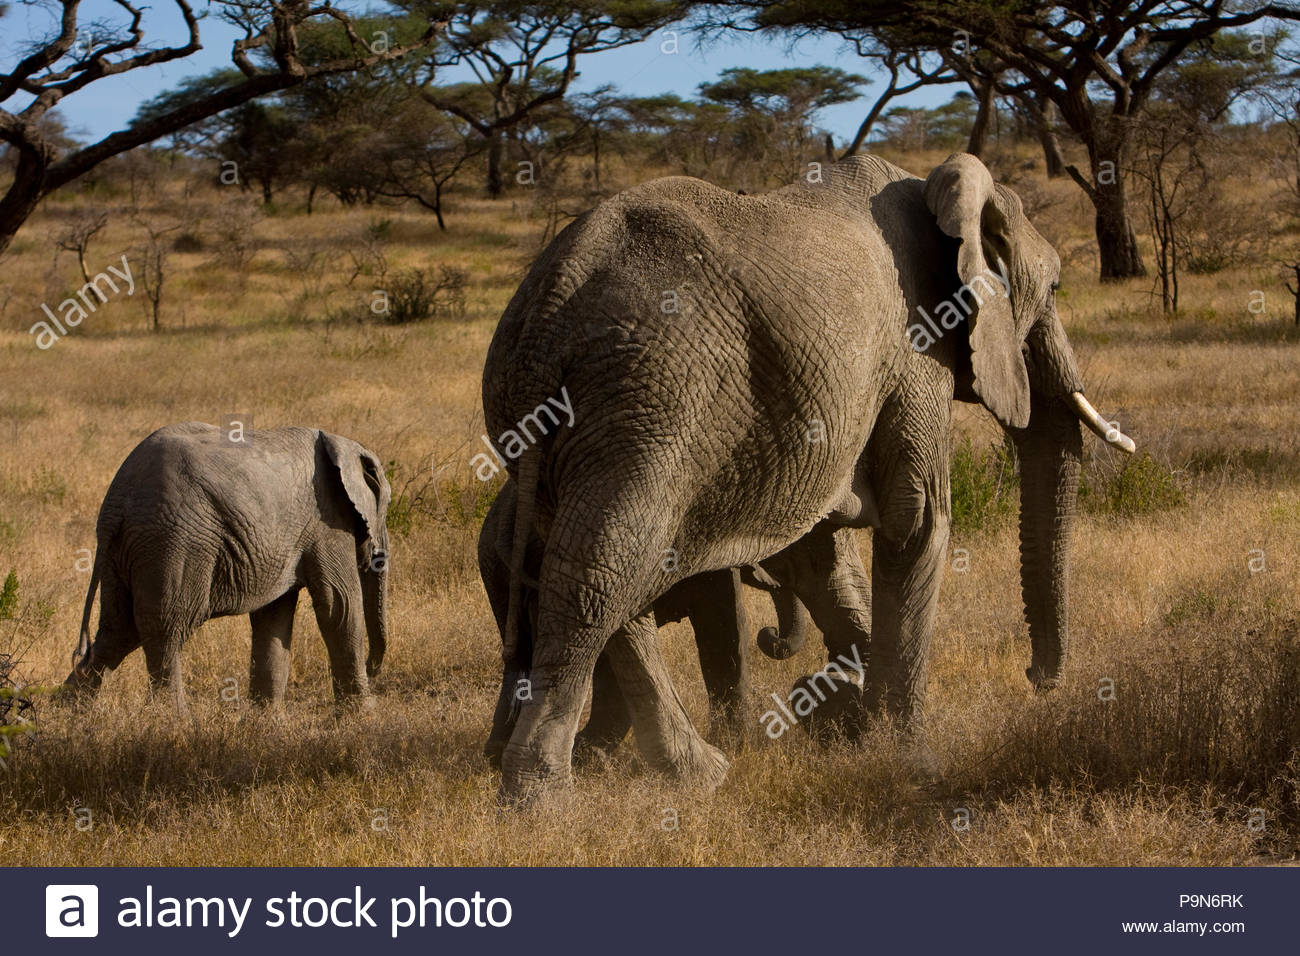 African elephants and two juveniles in African landscape. Stock Photo